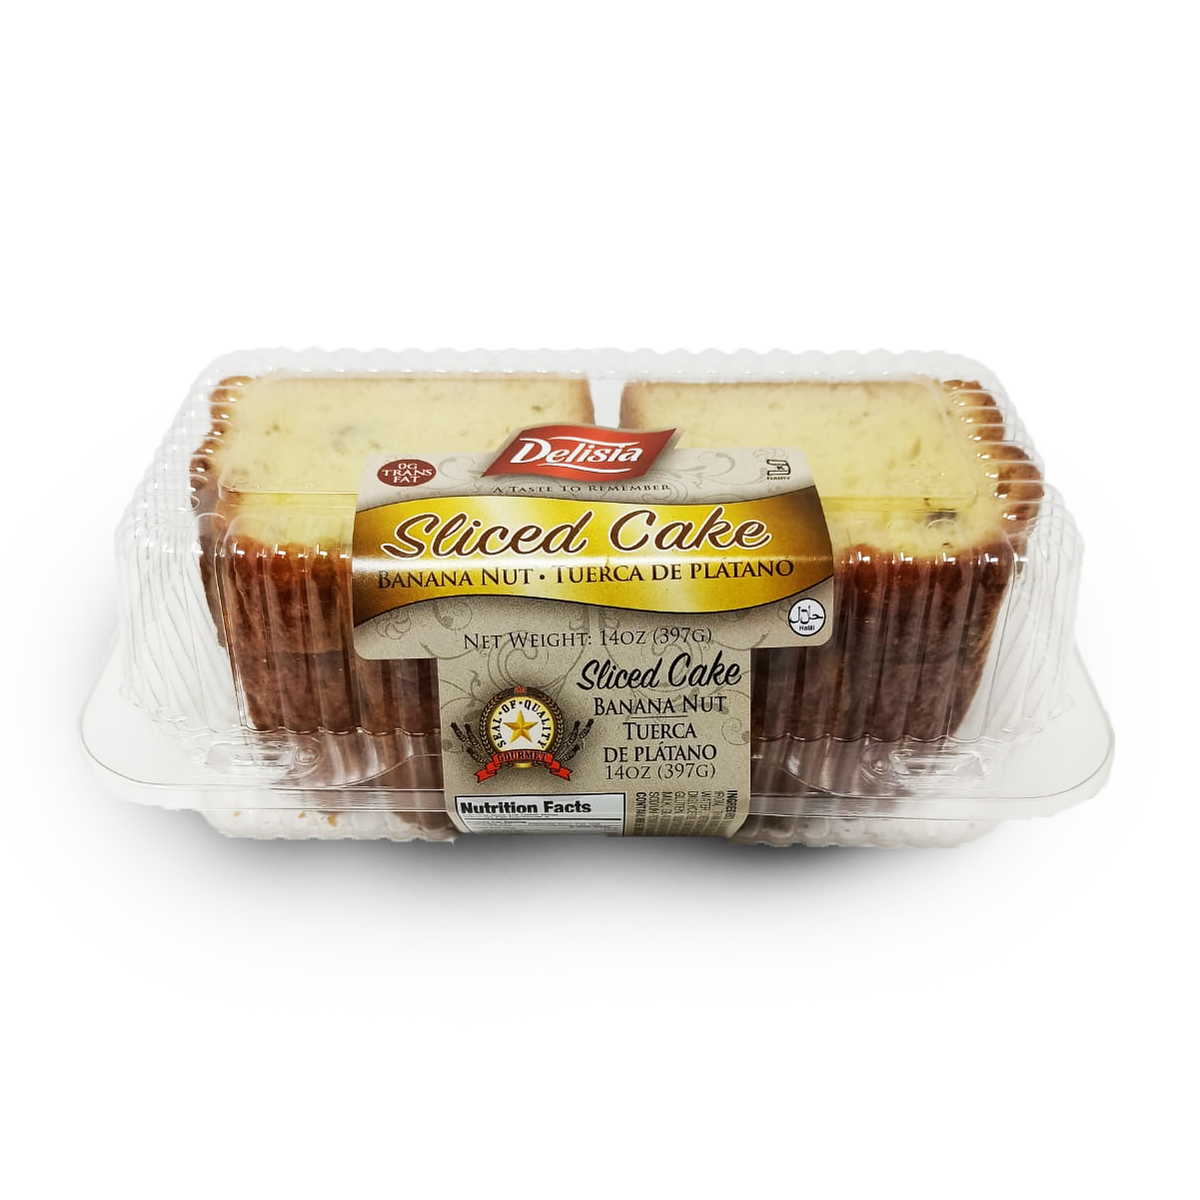 A Box of Delisia Sliced Cakes, Banana Nut Flavored